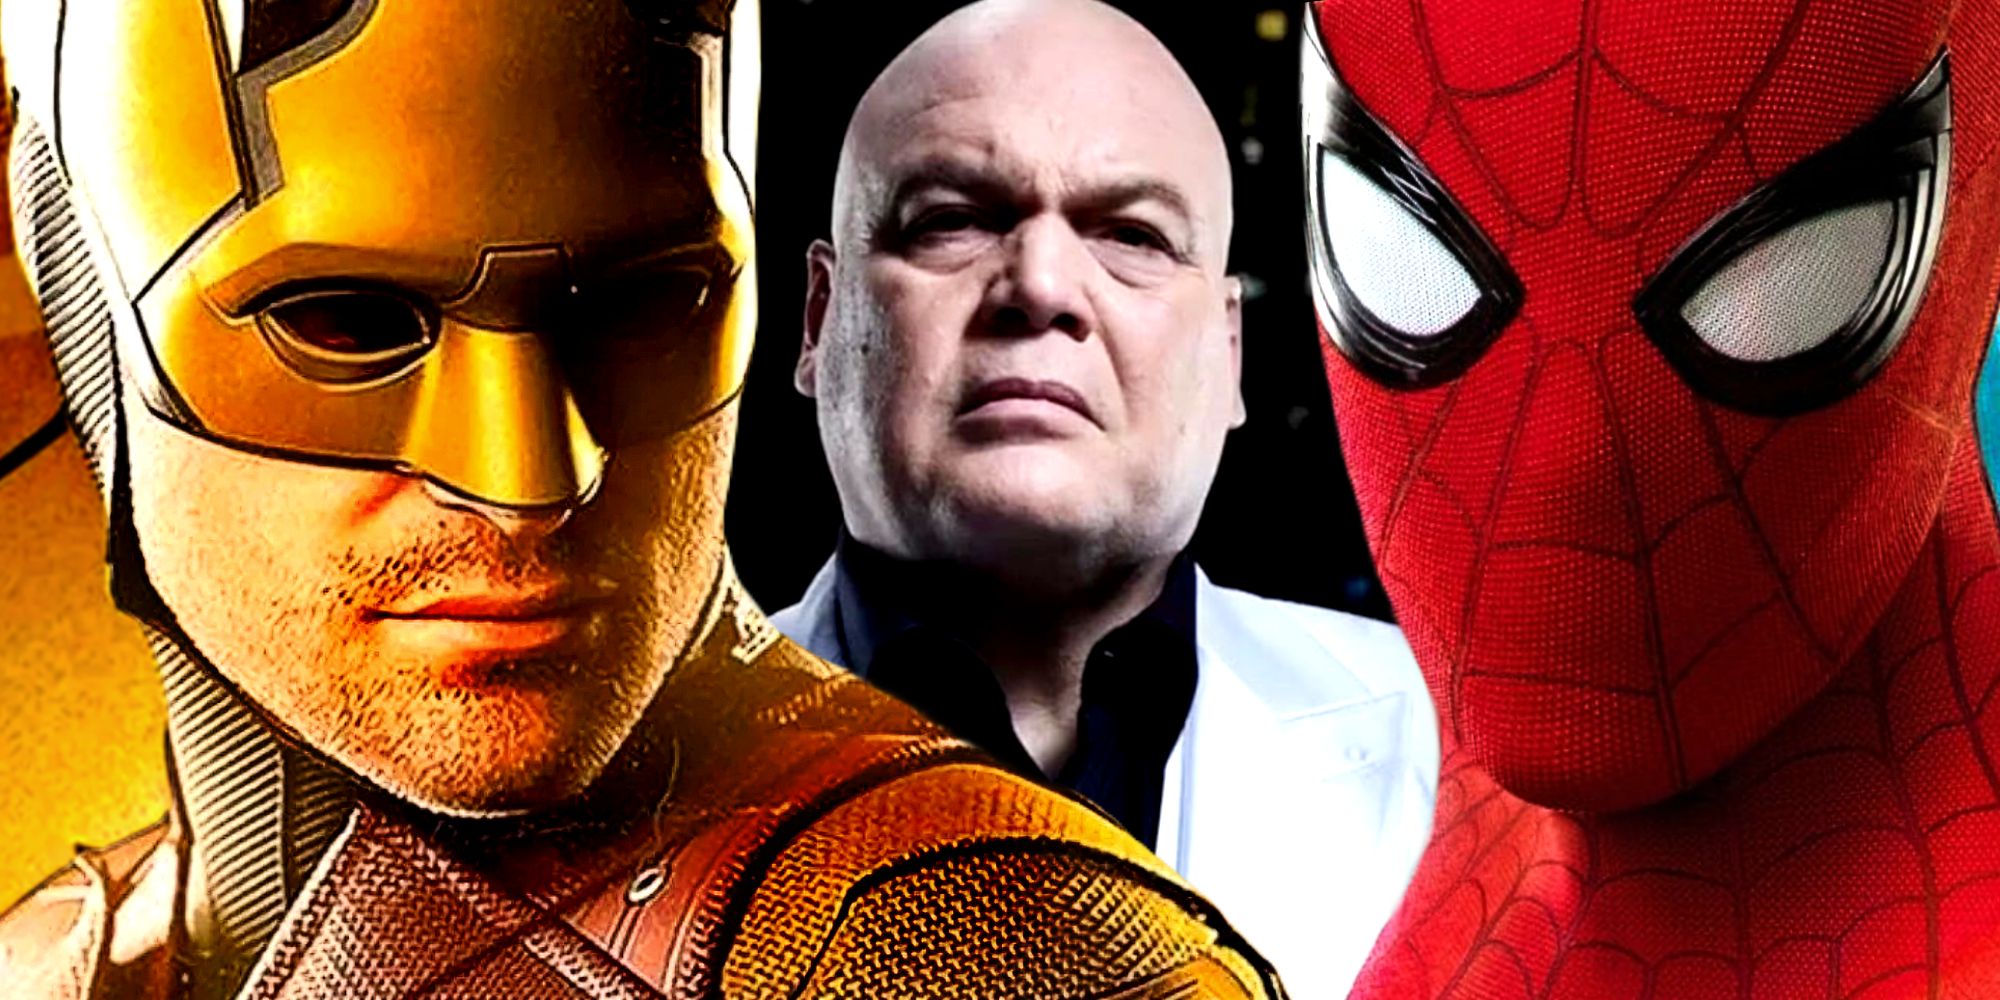 Tom Holland's Spider-Man, Charlie Cox's Daredevil, and Vincent D'Onofrio's Kingpin in the MCU